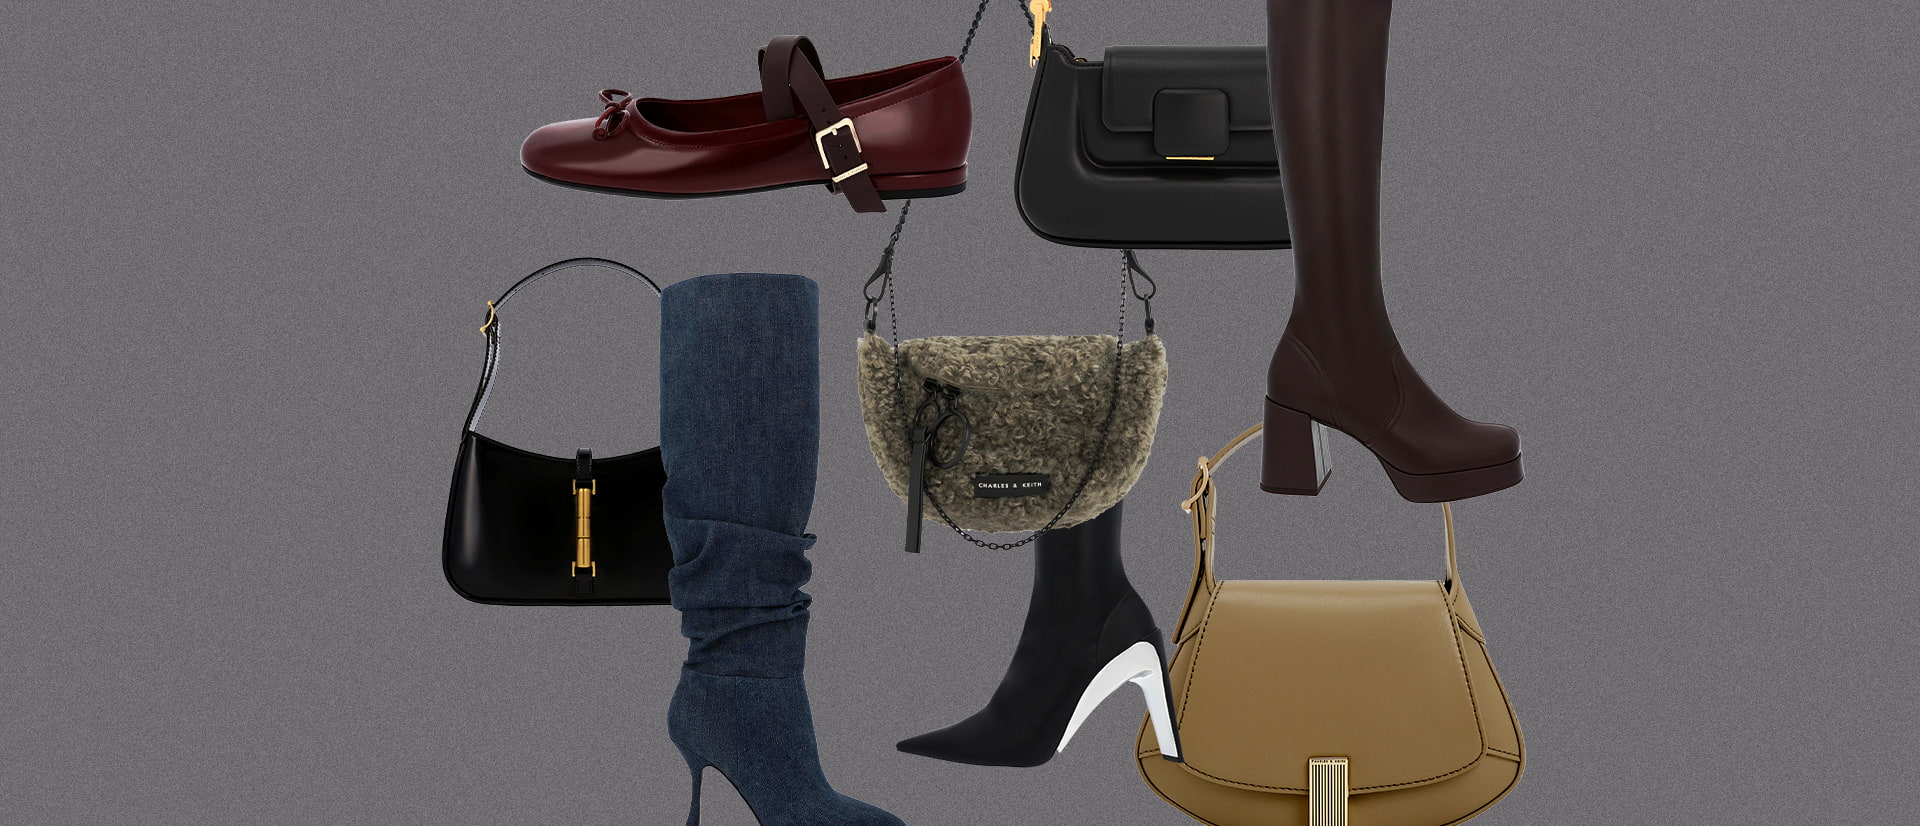 Women’s Koa Push-Lock Top Handle Bag, Cesia Metallic Accent Shoulder Bag, Metallic-Accent Curved Top Handle Bag, Philomena Furry Half-Moon Crossbody Bag, Aster Denim Ruched Knee-High Boots, Metallic Open-Toe Slingback Pumps and Delphine Recycled Polyester Platform Mules - CHARLES & KEITH